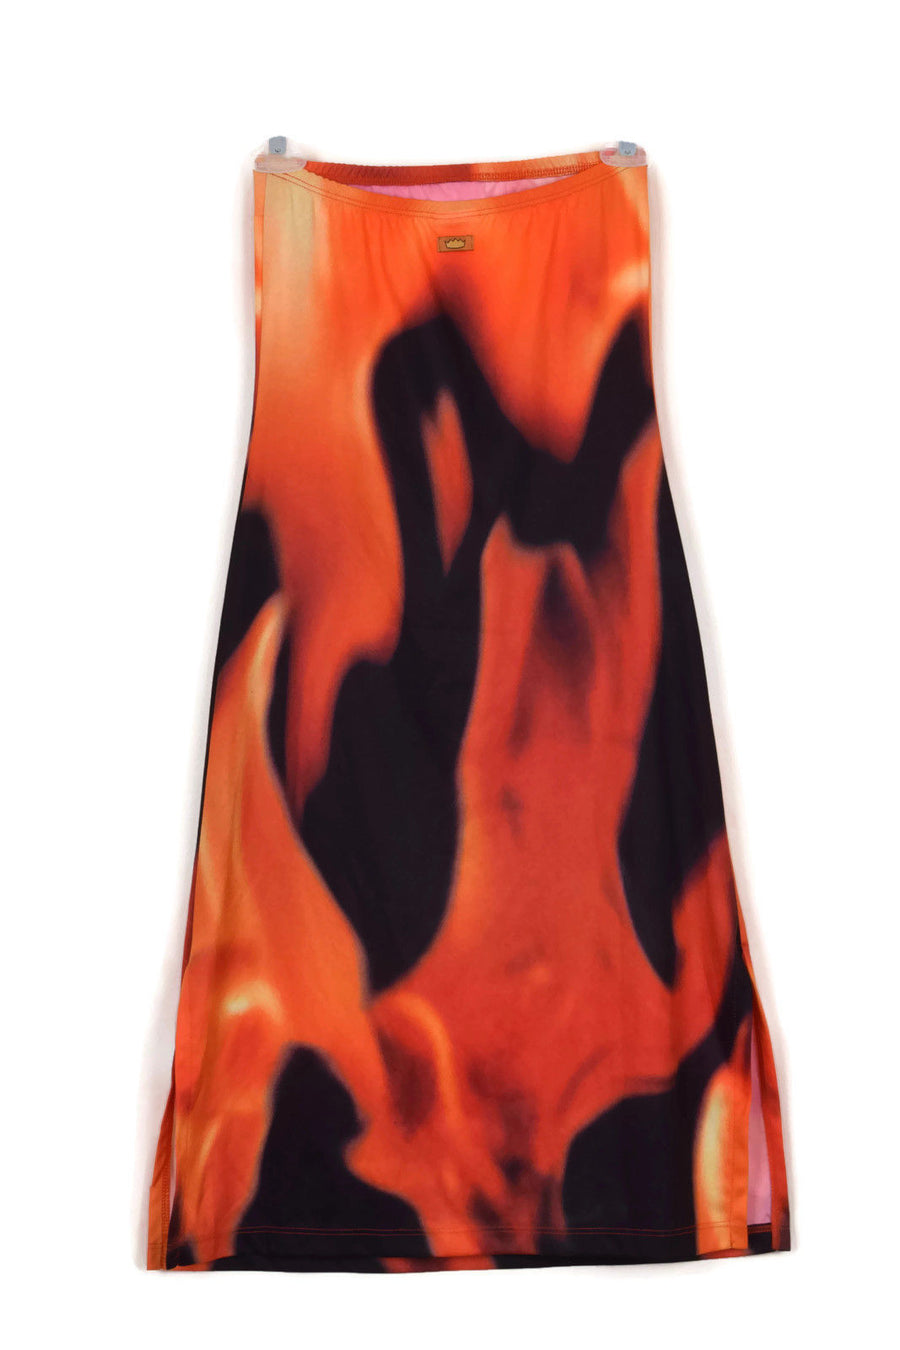 1994 TODD OLDHAM flame dress